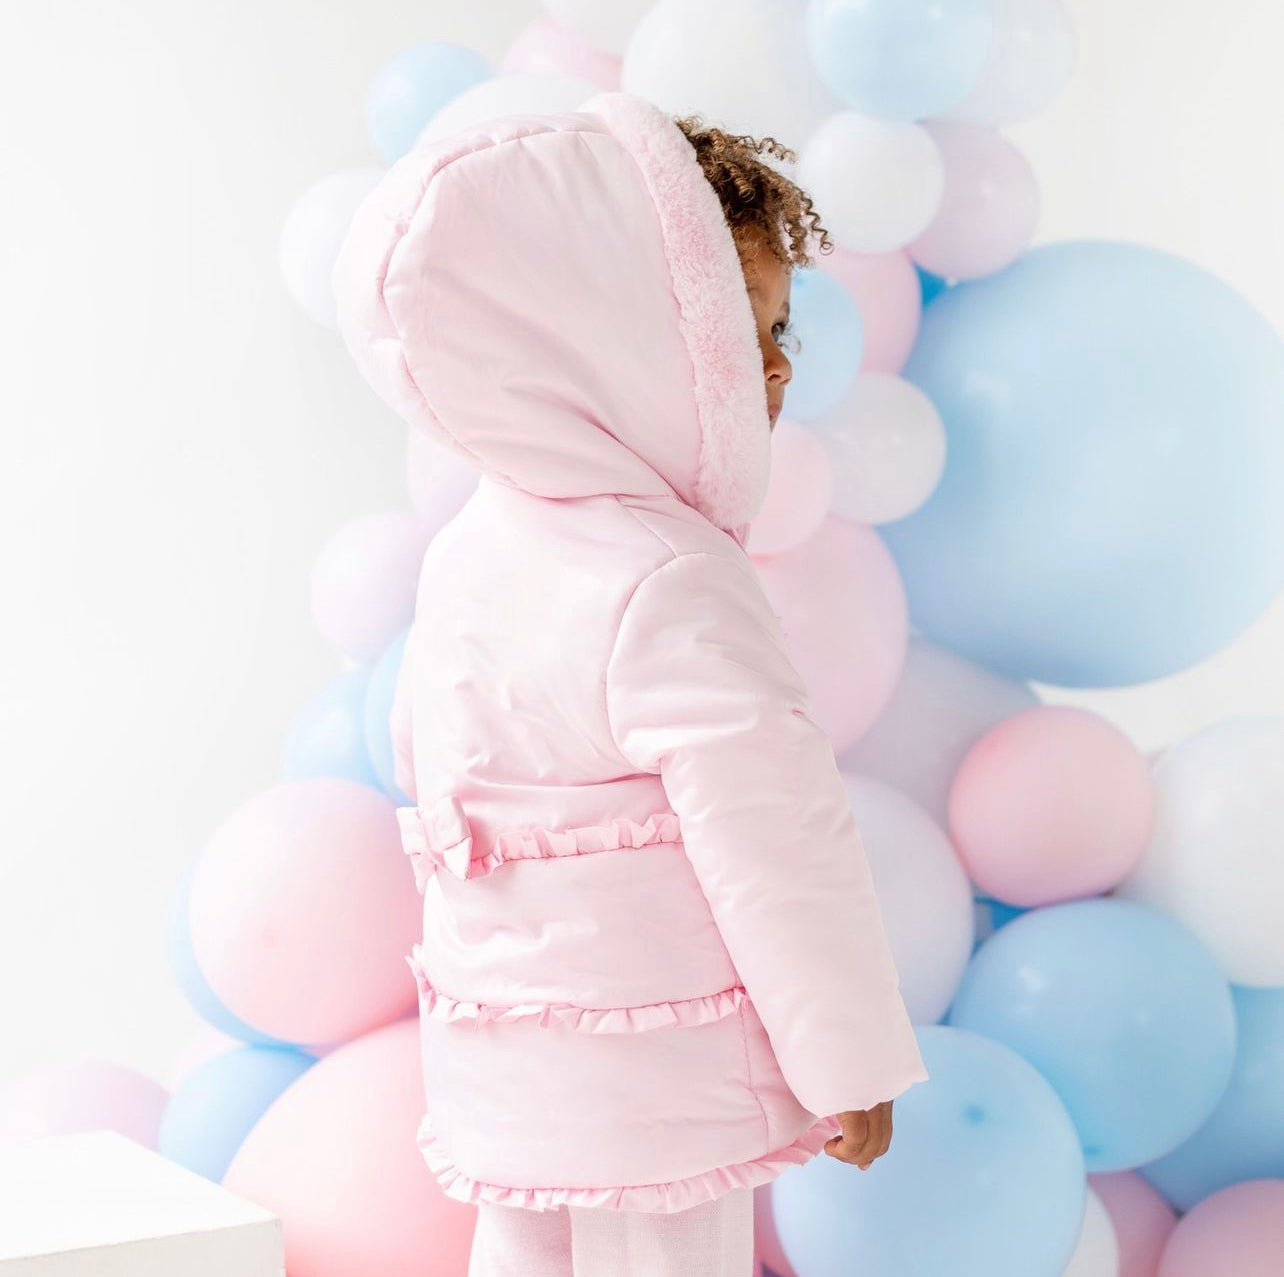 Blues Baby Girls Baby Pink Ruffles and Frills Jacket with fur hood